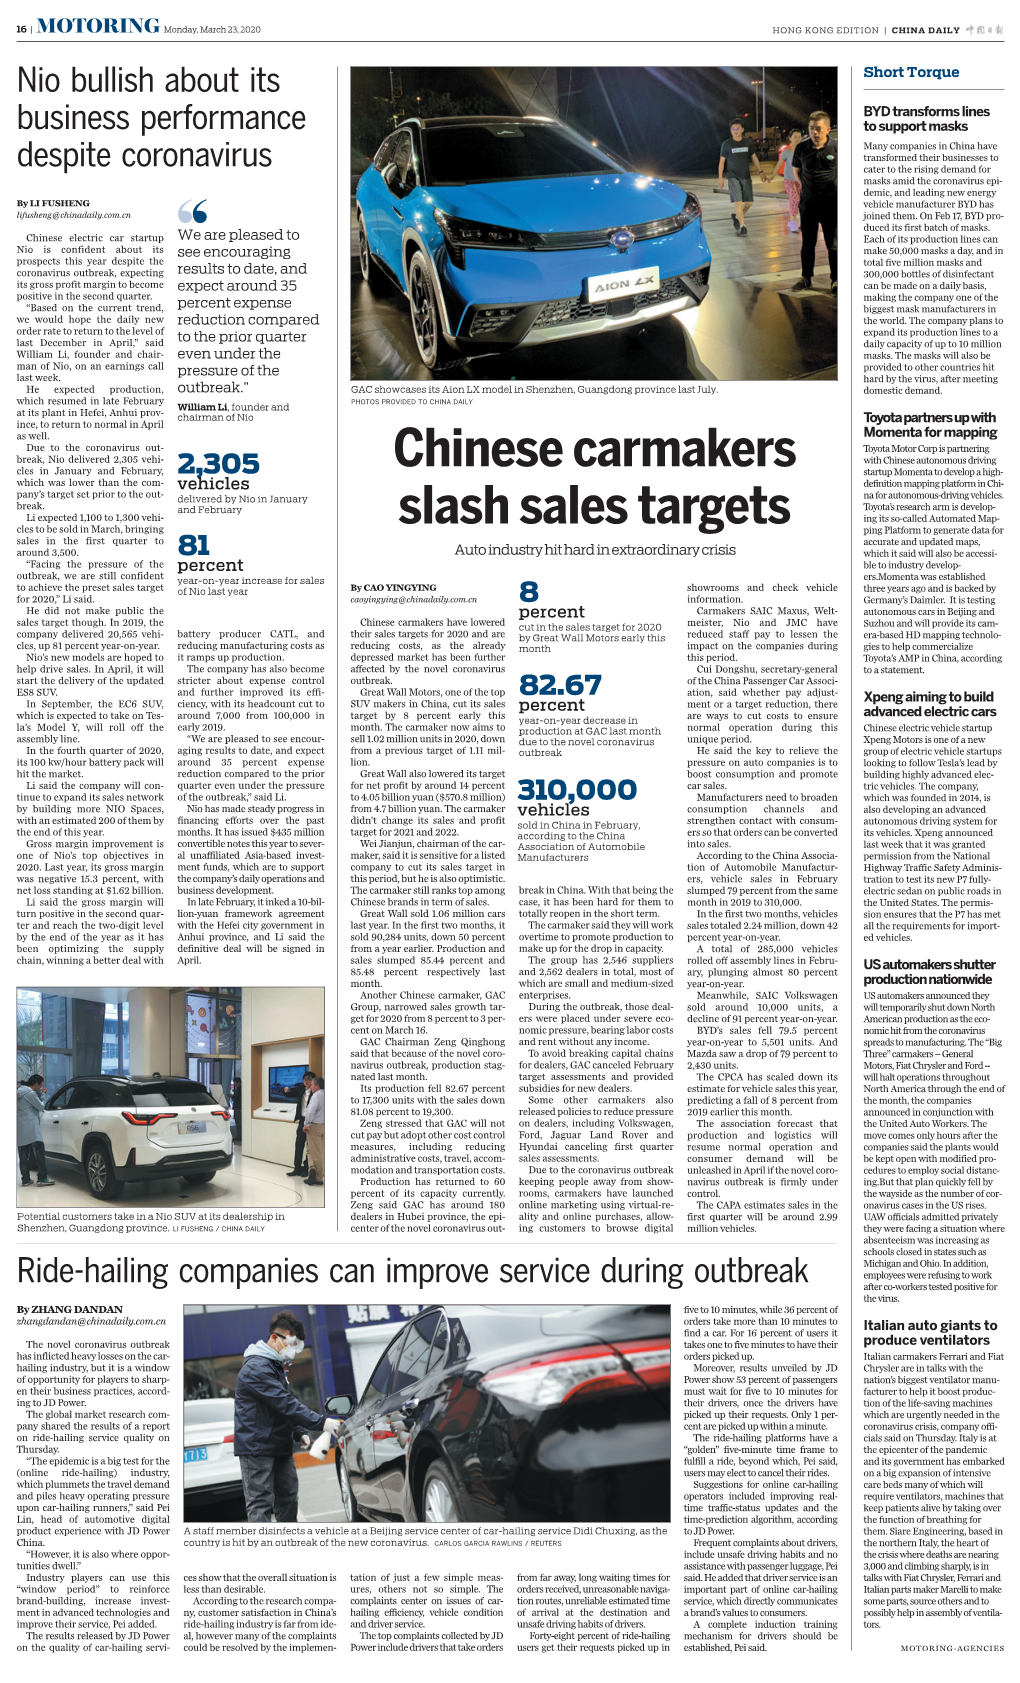 Chinese Carmakers Slash Sales Targets